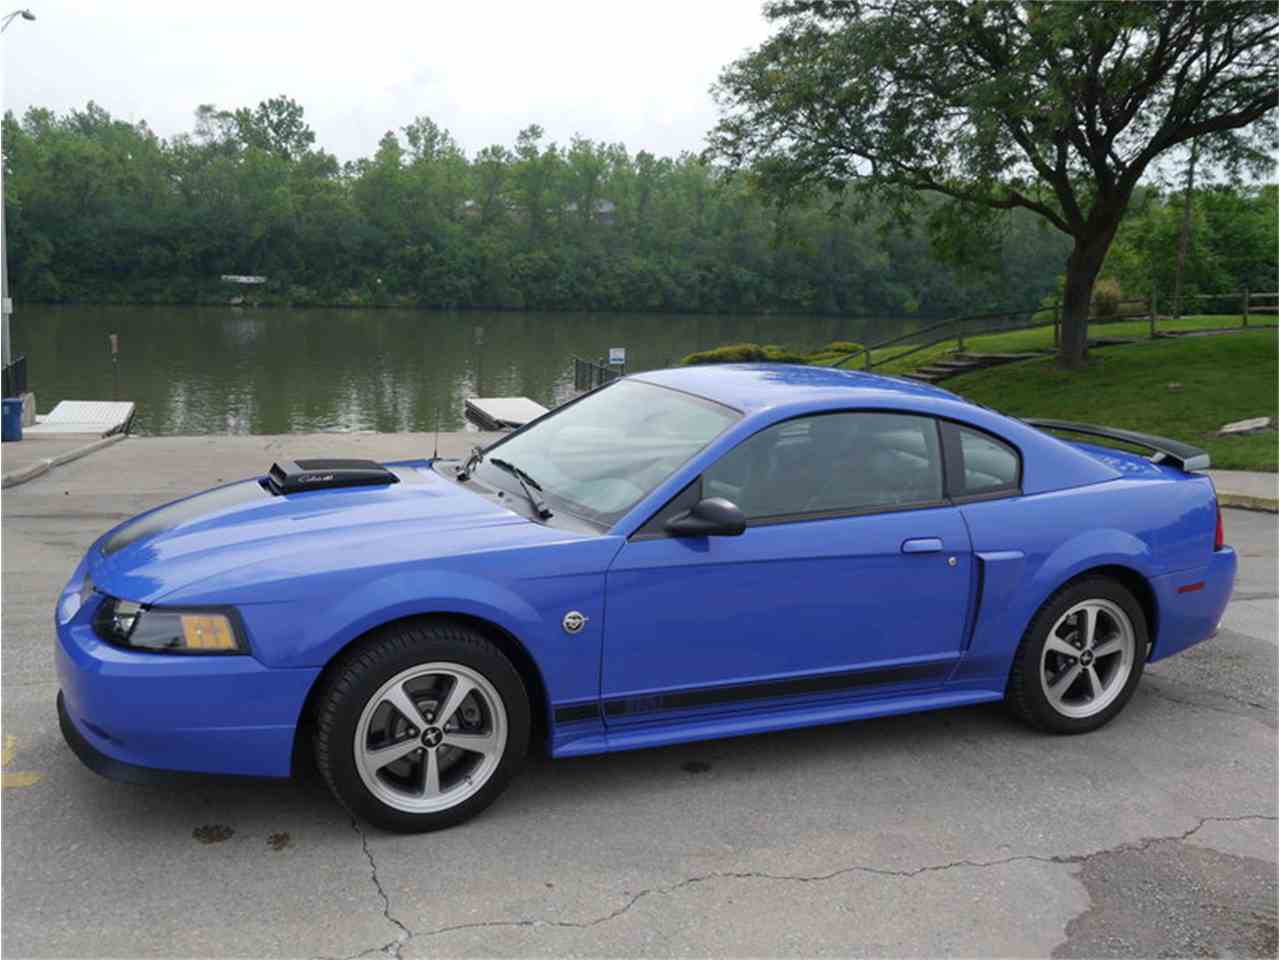 2004 Ford Mustang Mach 1 for Sale | ClassicCars.com | CC-997717